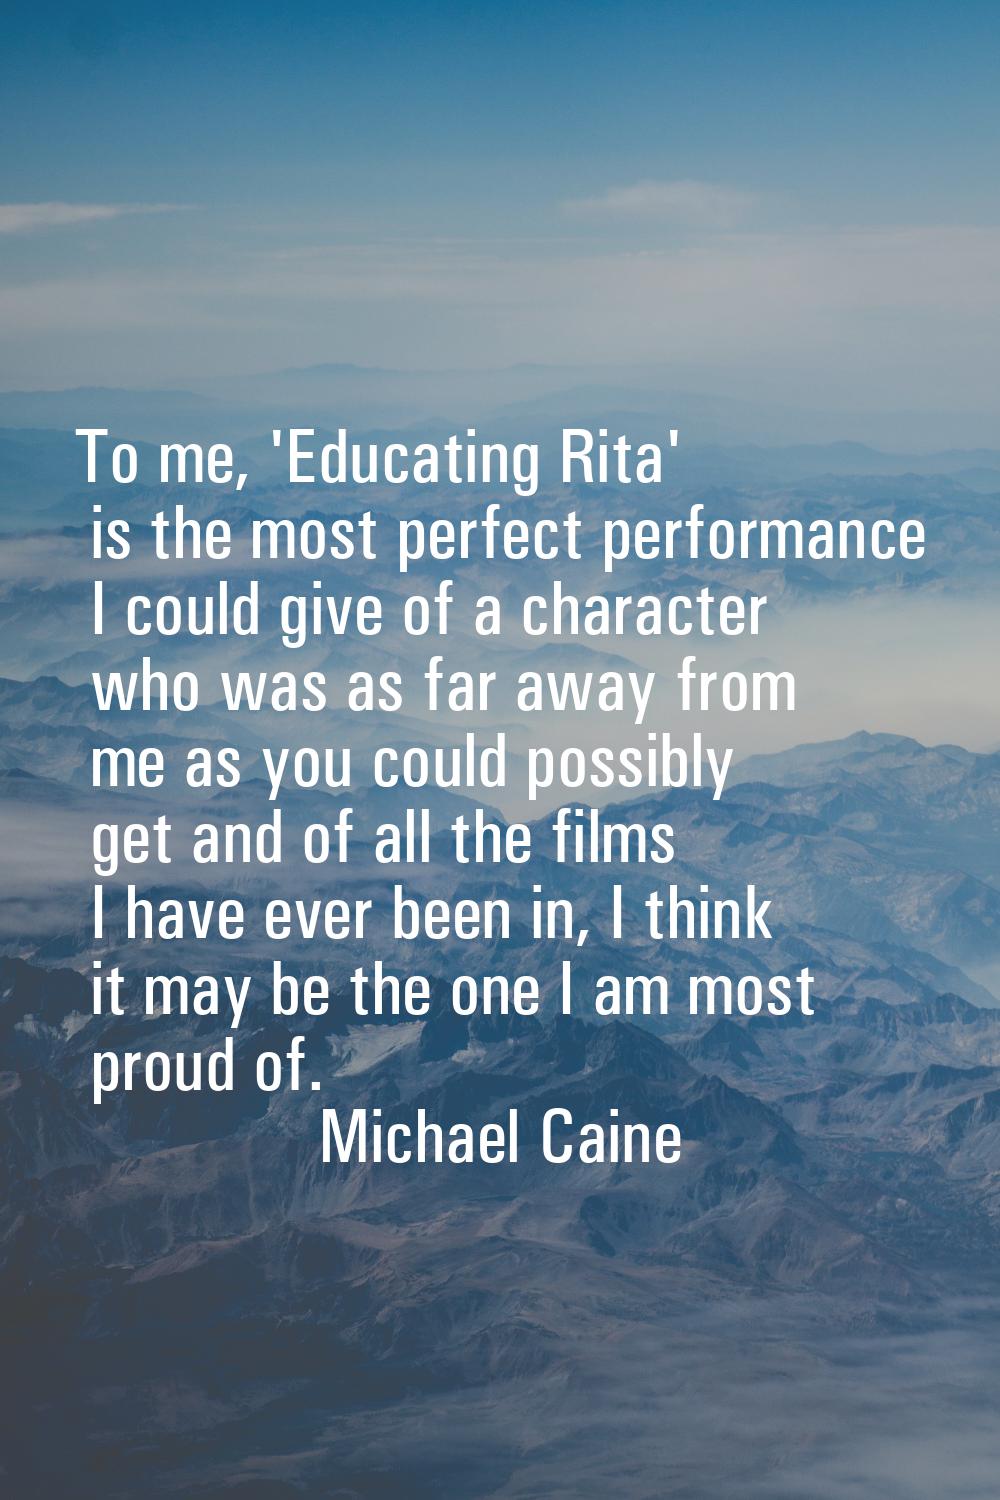 To me, 'Educating Rita' is the most perfect performance I could give of a character who was as far 